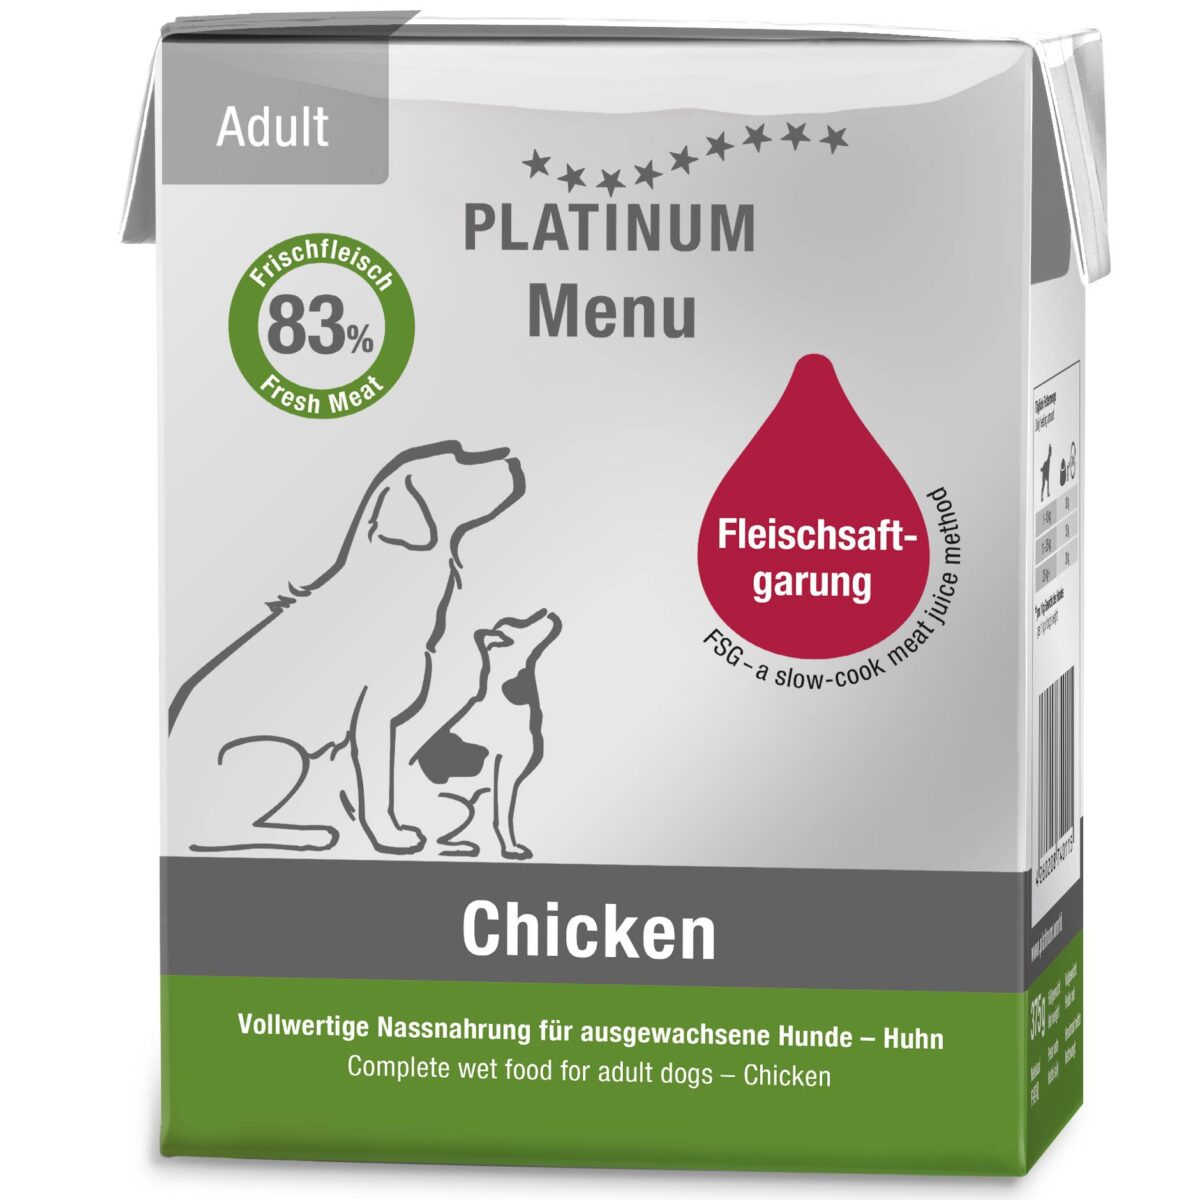 2-Chicken-Pack3-frontal-right-view